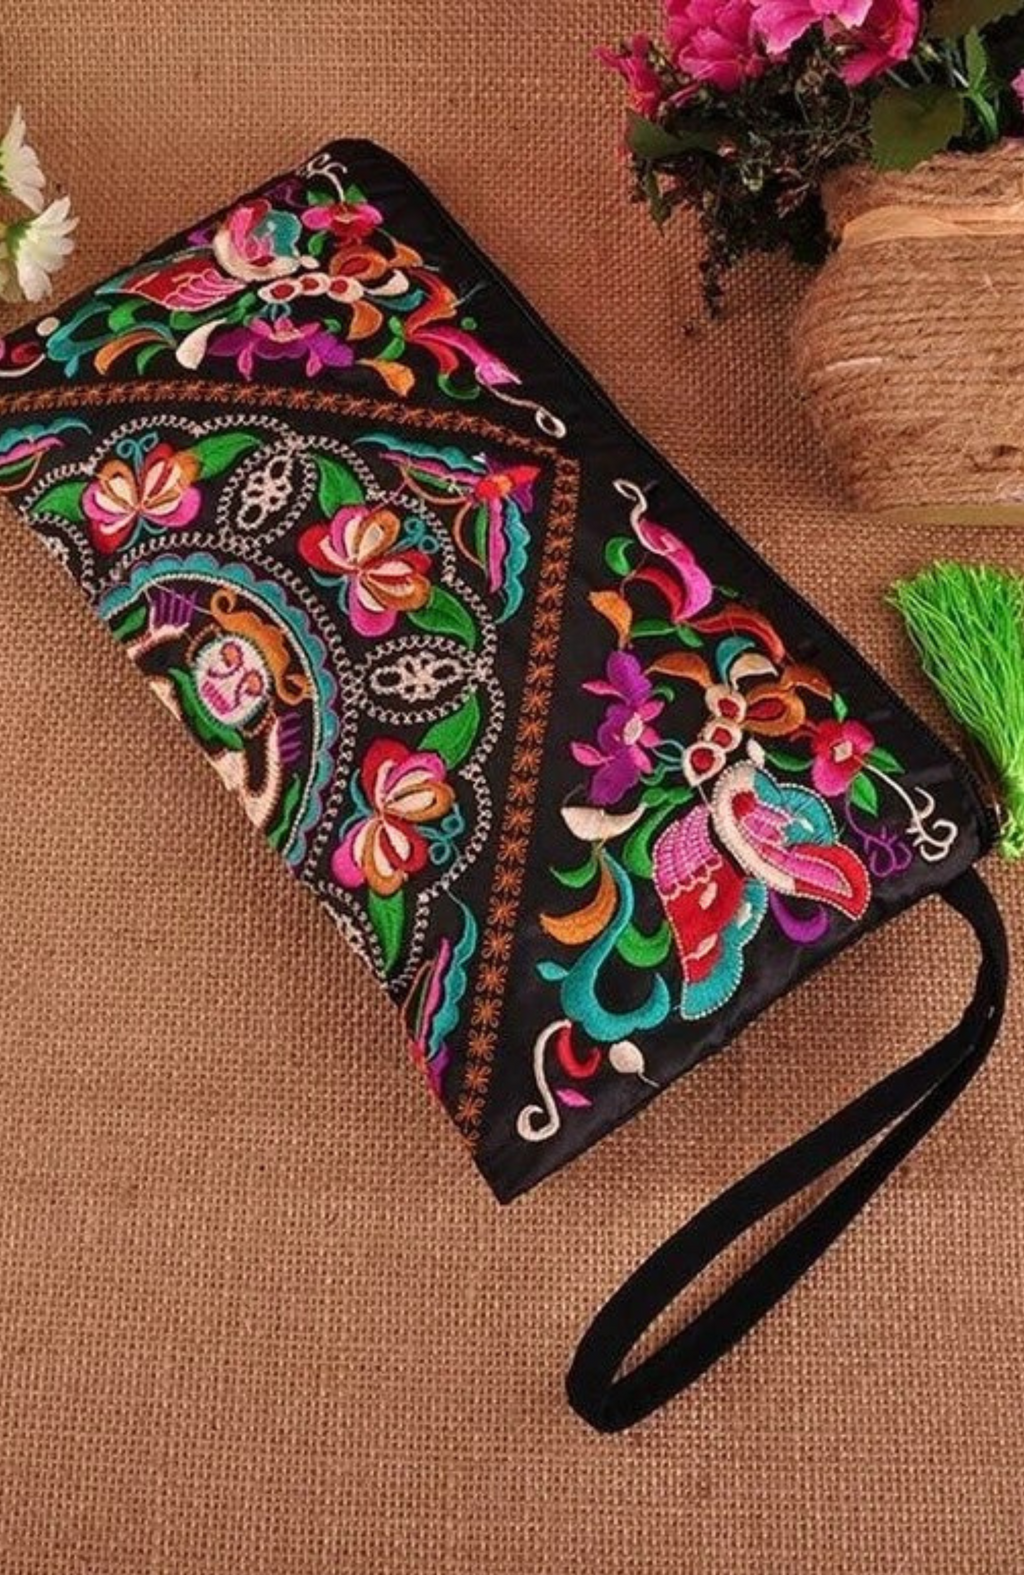 Embroided Bag With Green Tassel